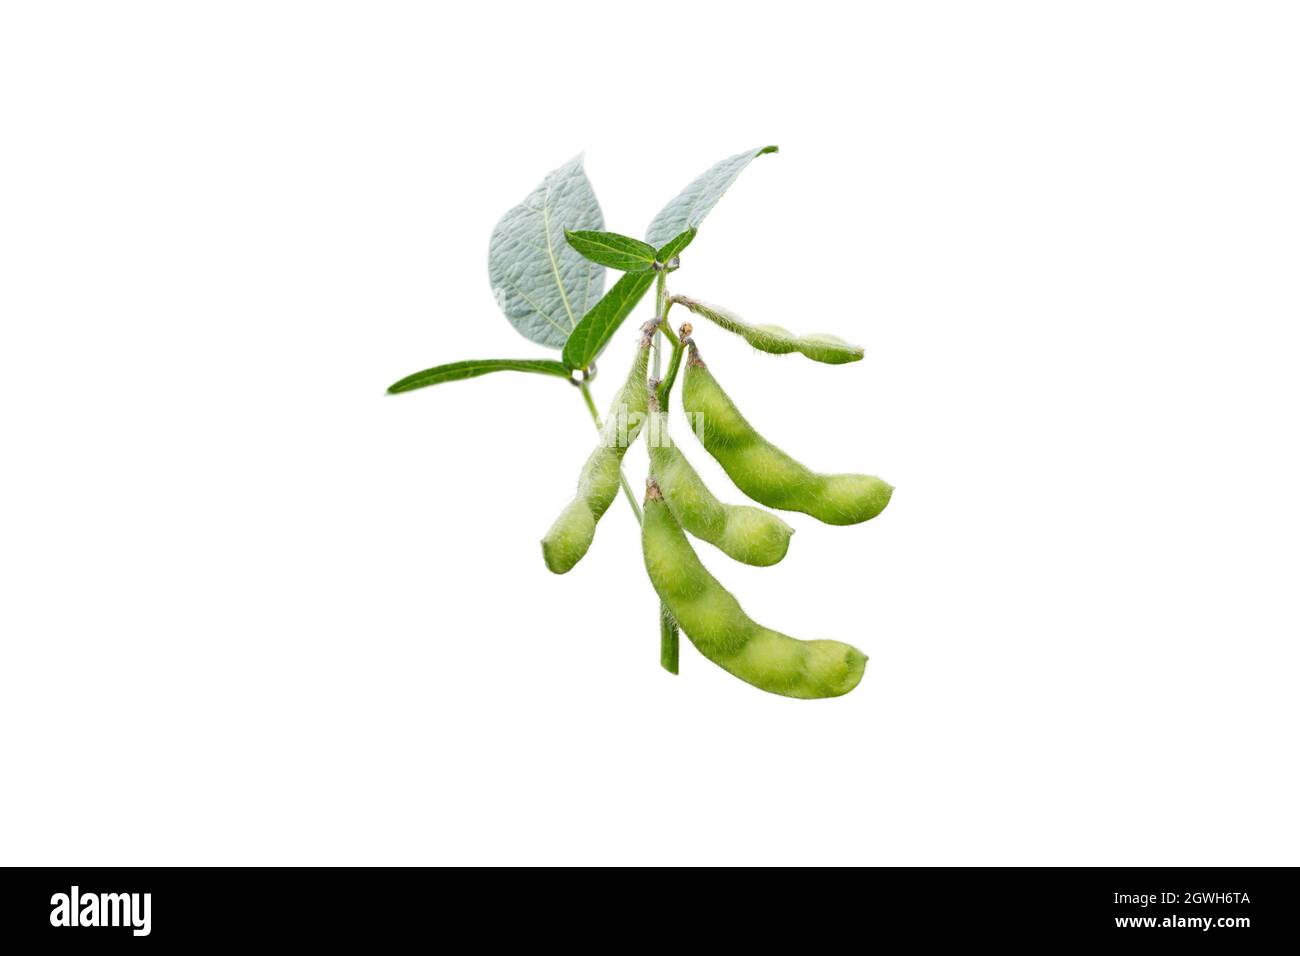 Soybean or soya bean branch isolated on white. Glycine max plant with beans and leaves. Stock Photo